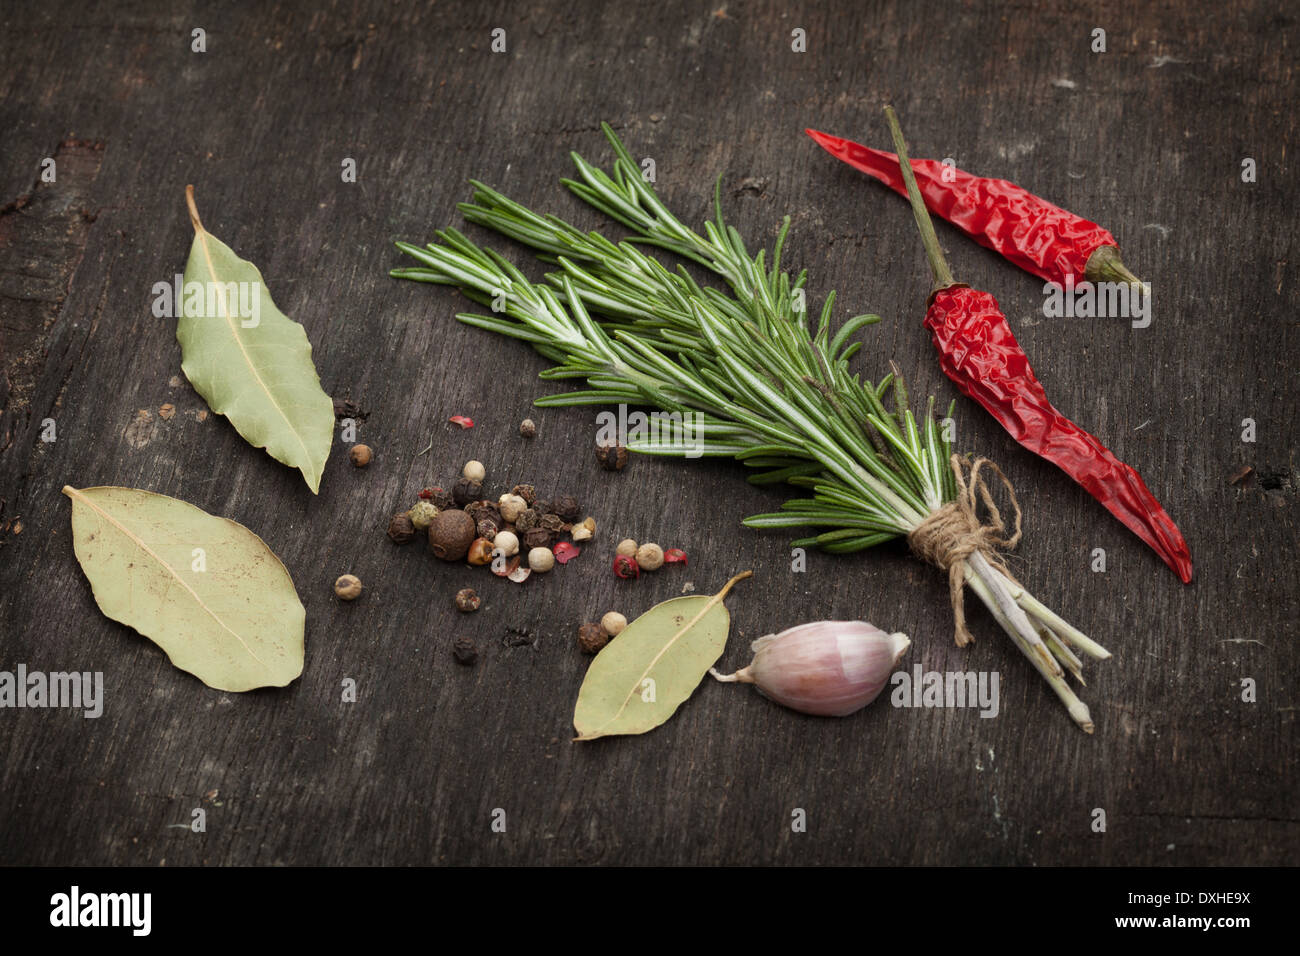 Herbs and spices over old wood table background Stock Photo